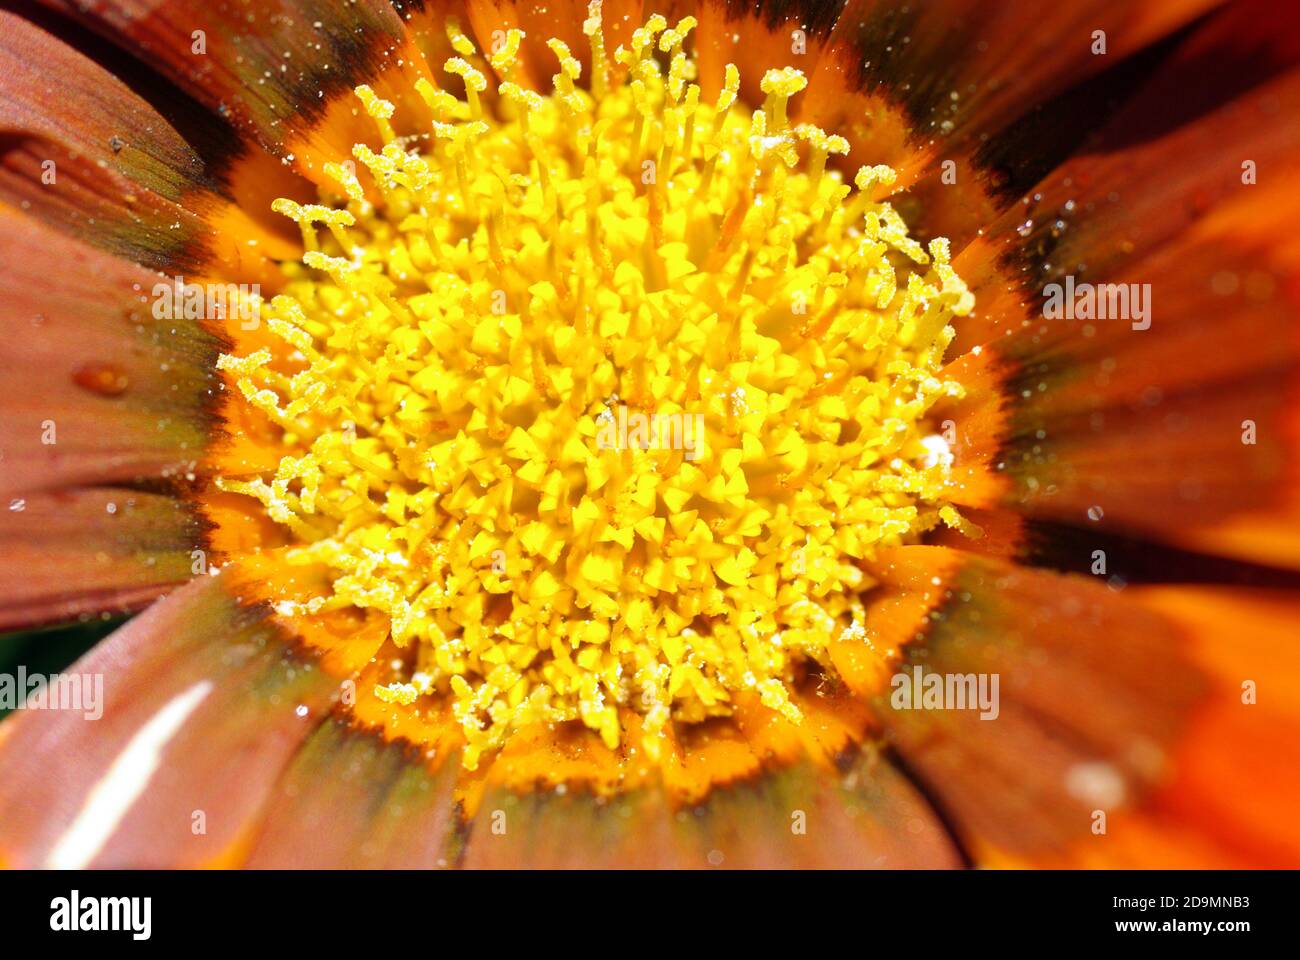 https://c8.alamy.com/comp/2D9MNB3/reproduction-organs-of-the-flower-anthers-swollen-pollen-producing-parts-2D9MNB3.jpg